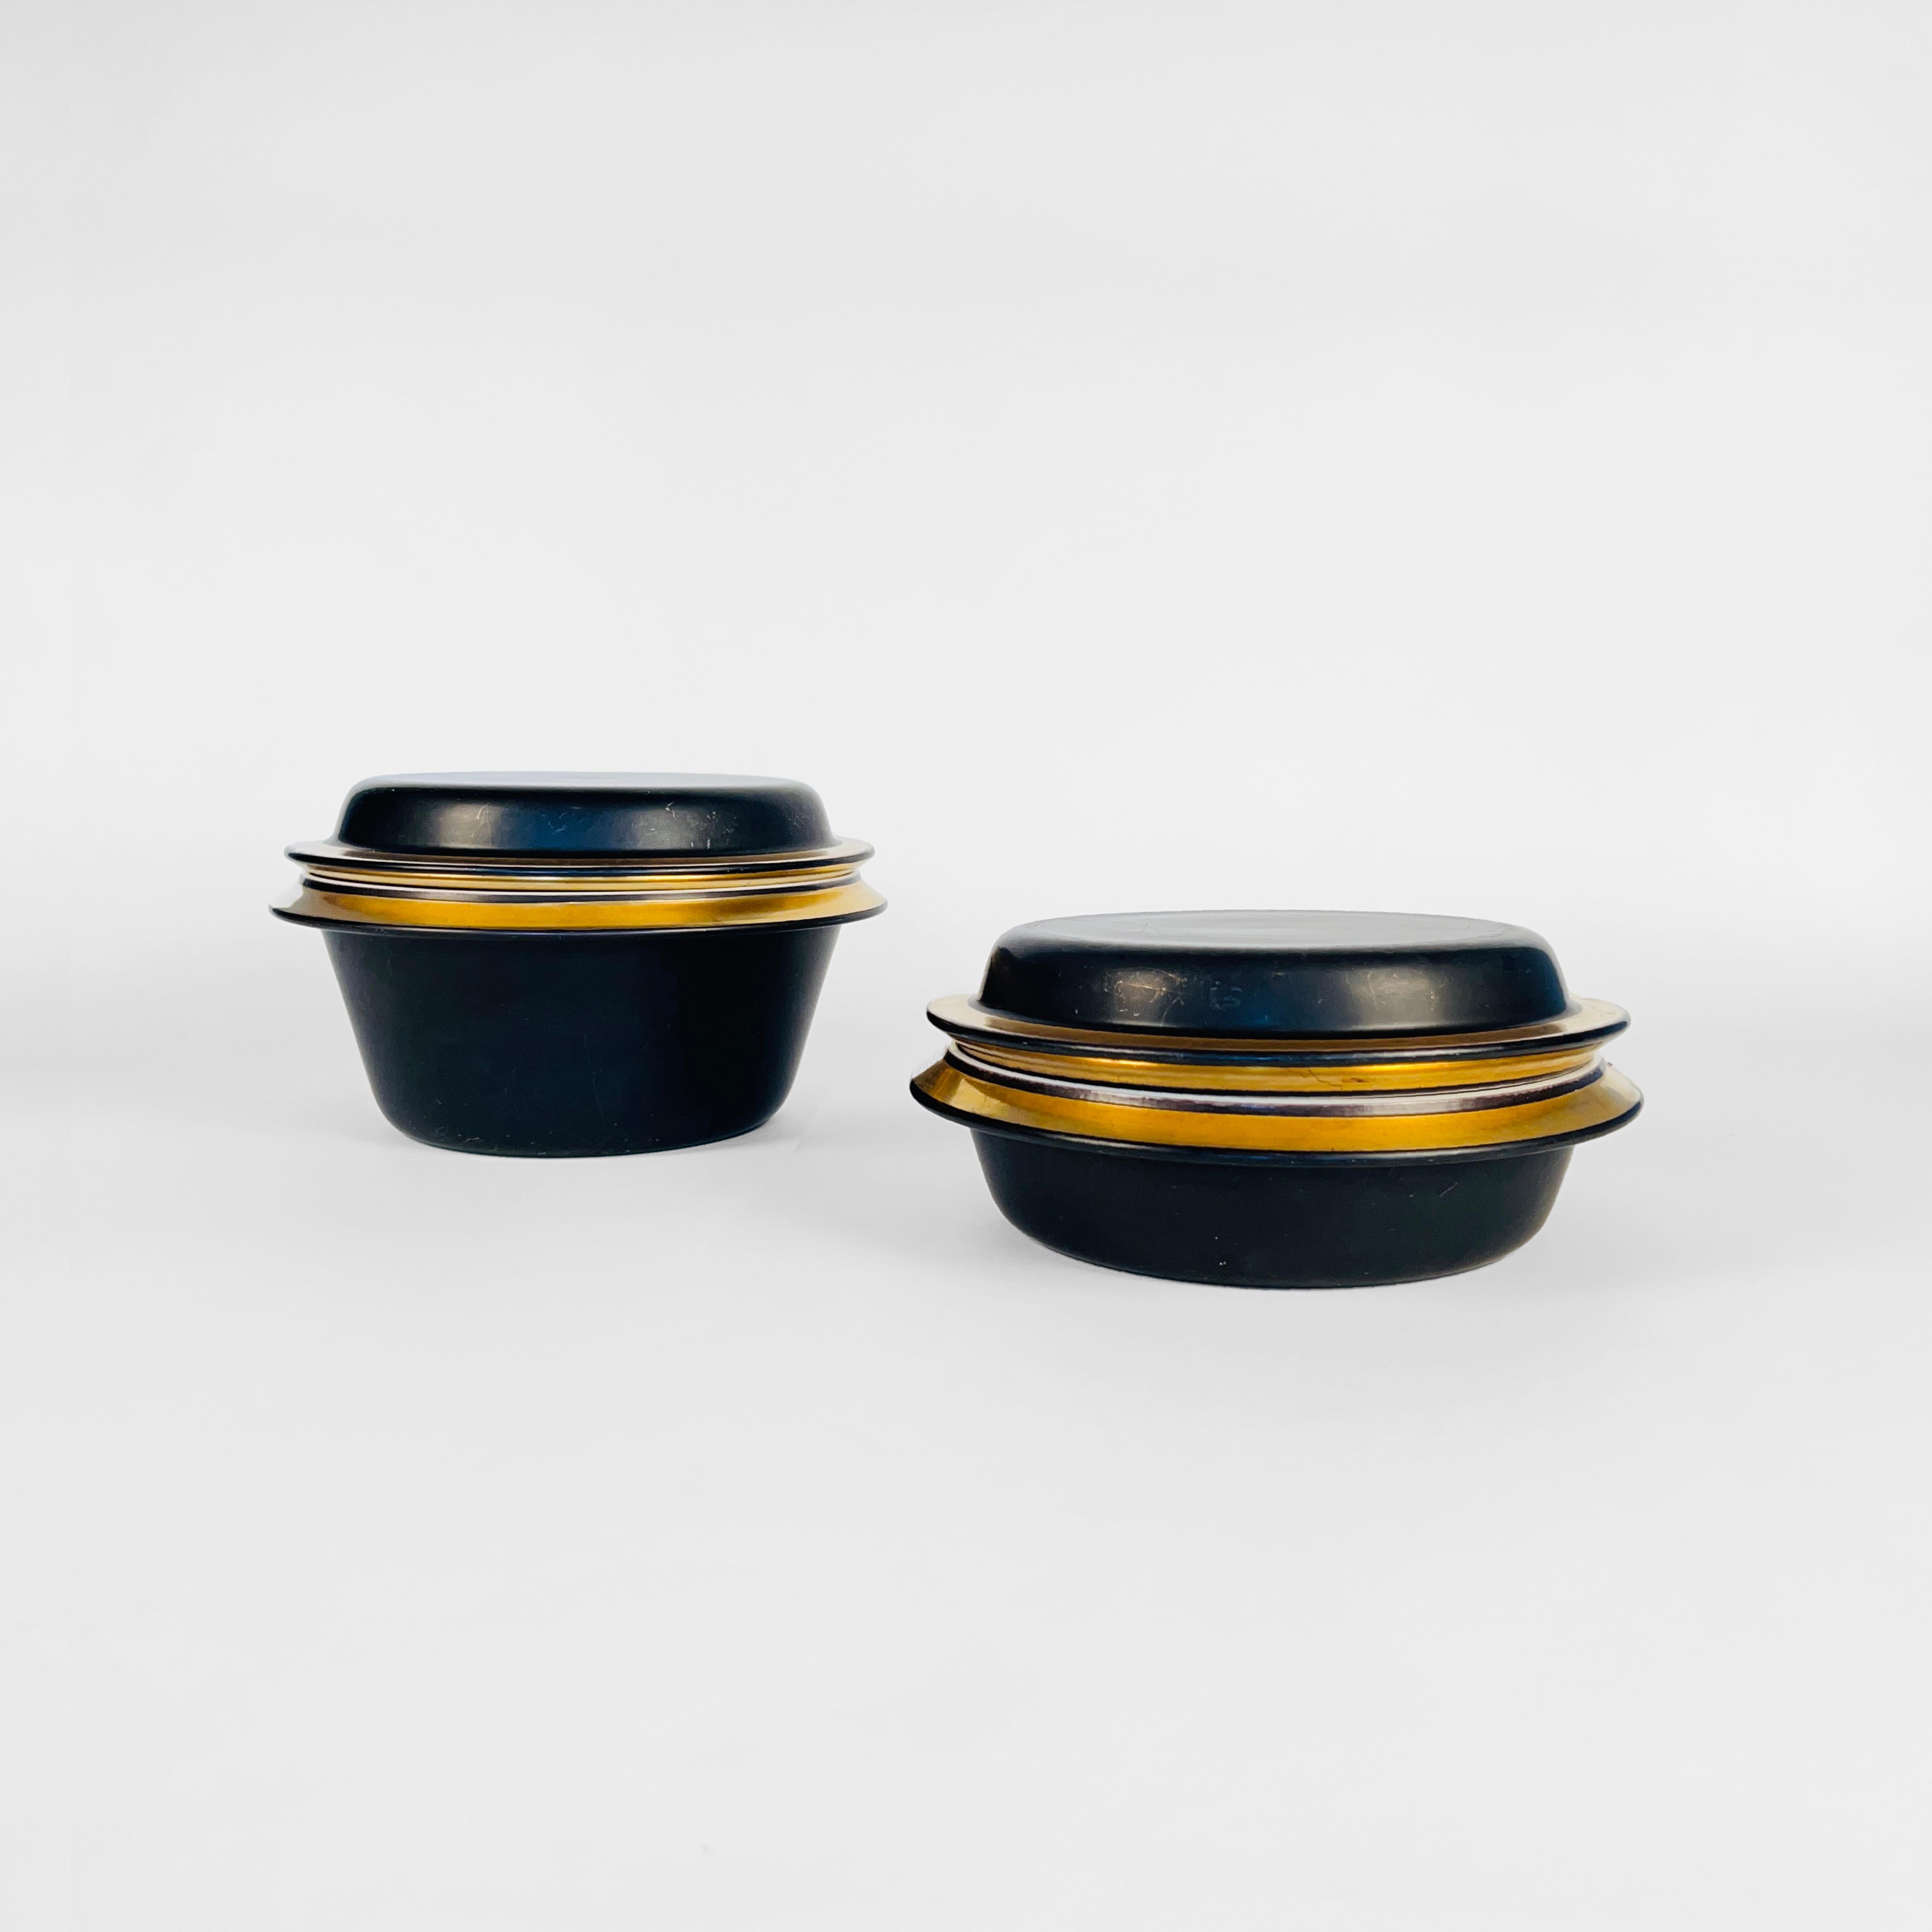 Pair of bowls designed by Ingvar Olsen for Royal Copenhagen Aluminia Faience in 1959.
The exterior is finished in black with a gold rim, and the interior in glossy milky white.
DIMENSIONS
TALL
Height 5.5 IN / 13.97 CM
Diam 9 IN / 22.86 CM
LOW
Height